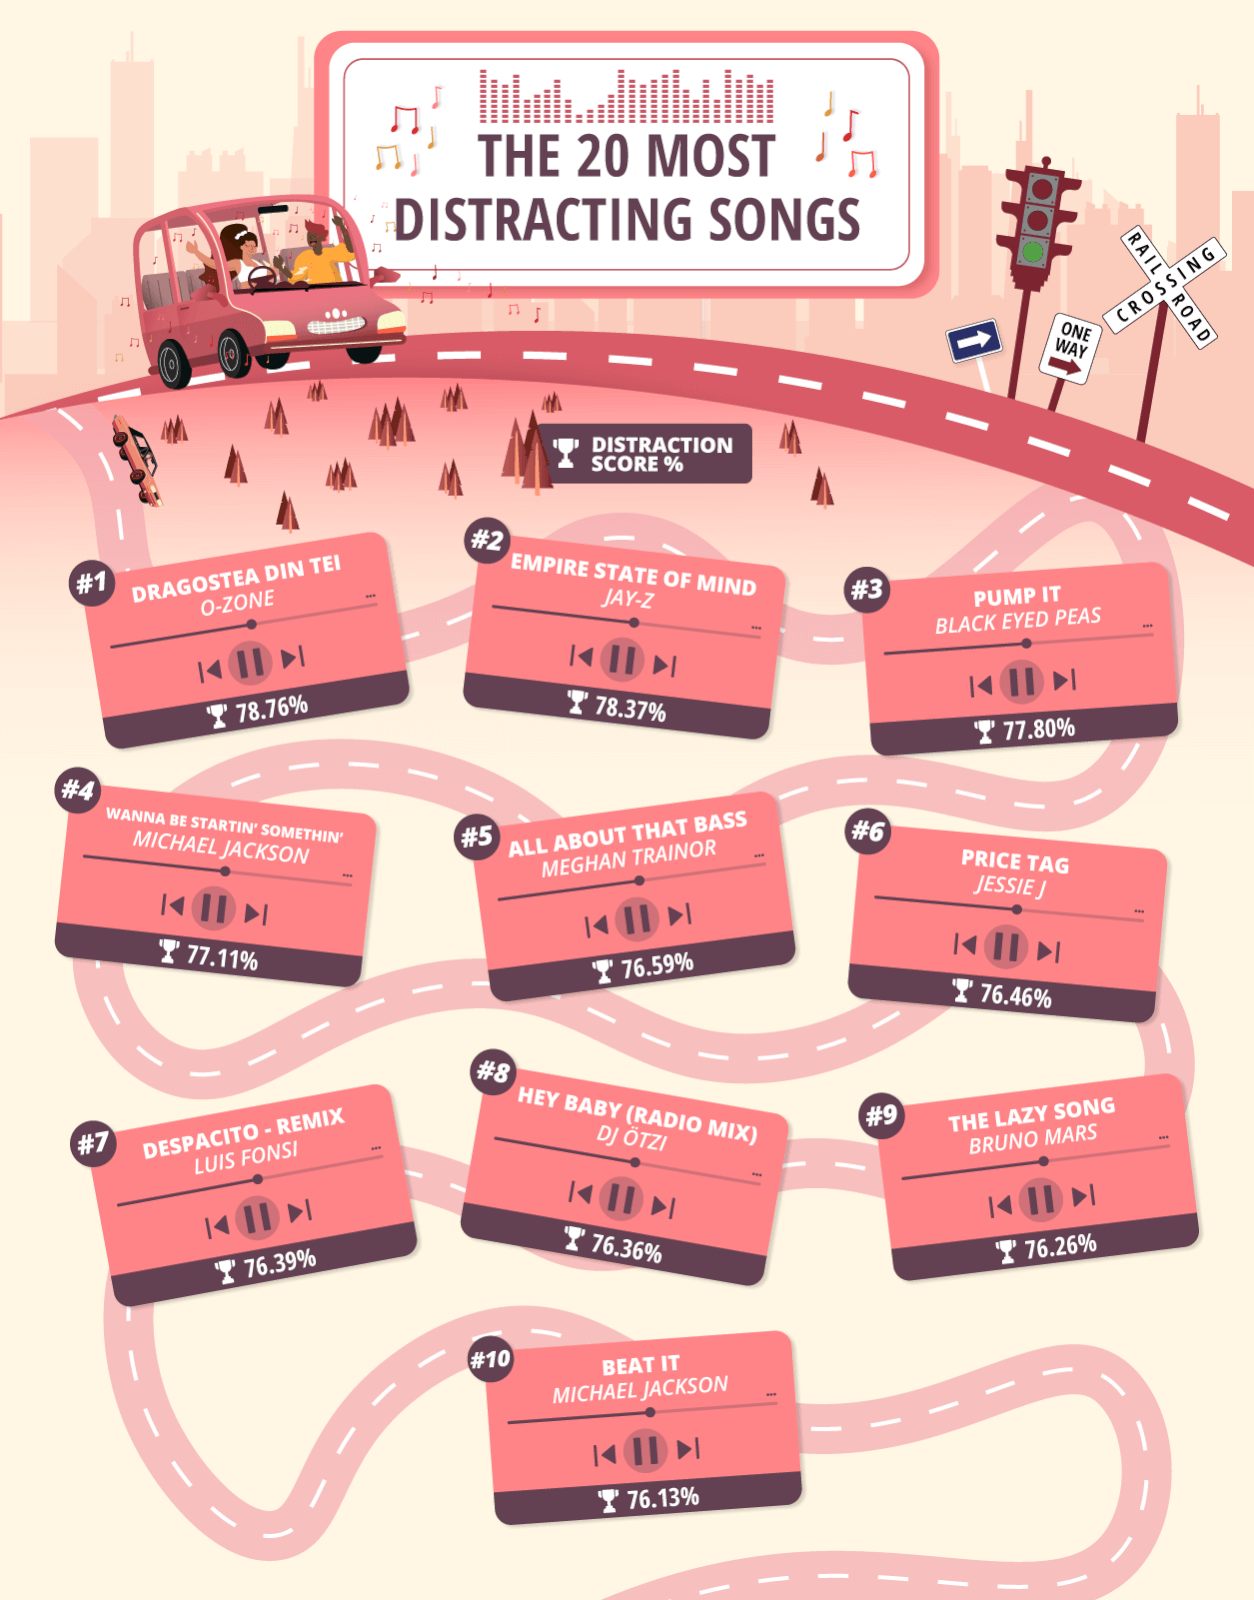 Image showing the ten most distracting songs to listen to while driving.